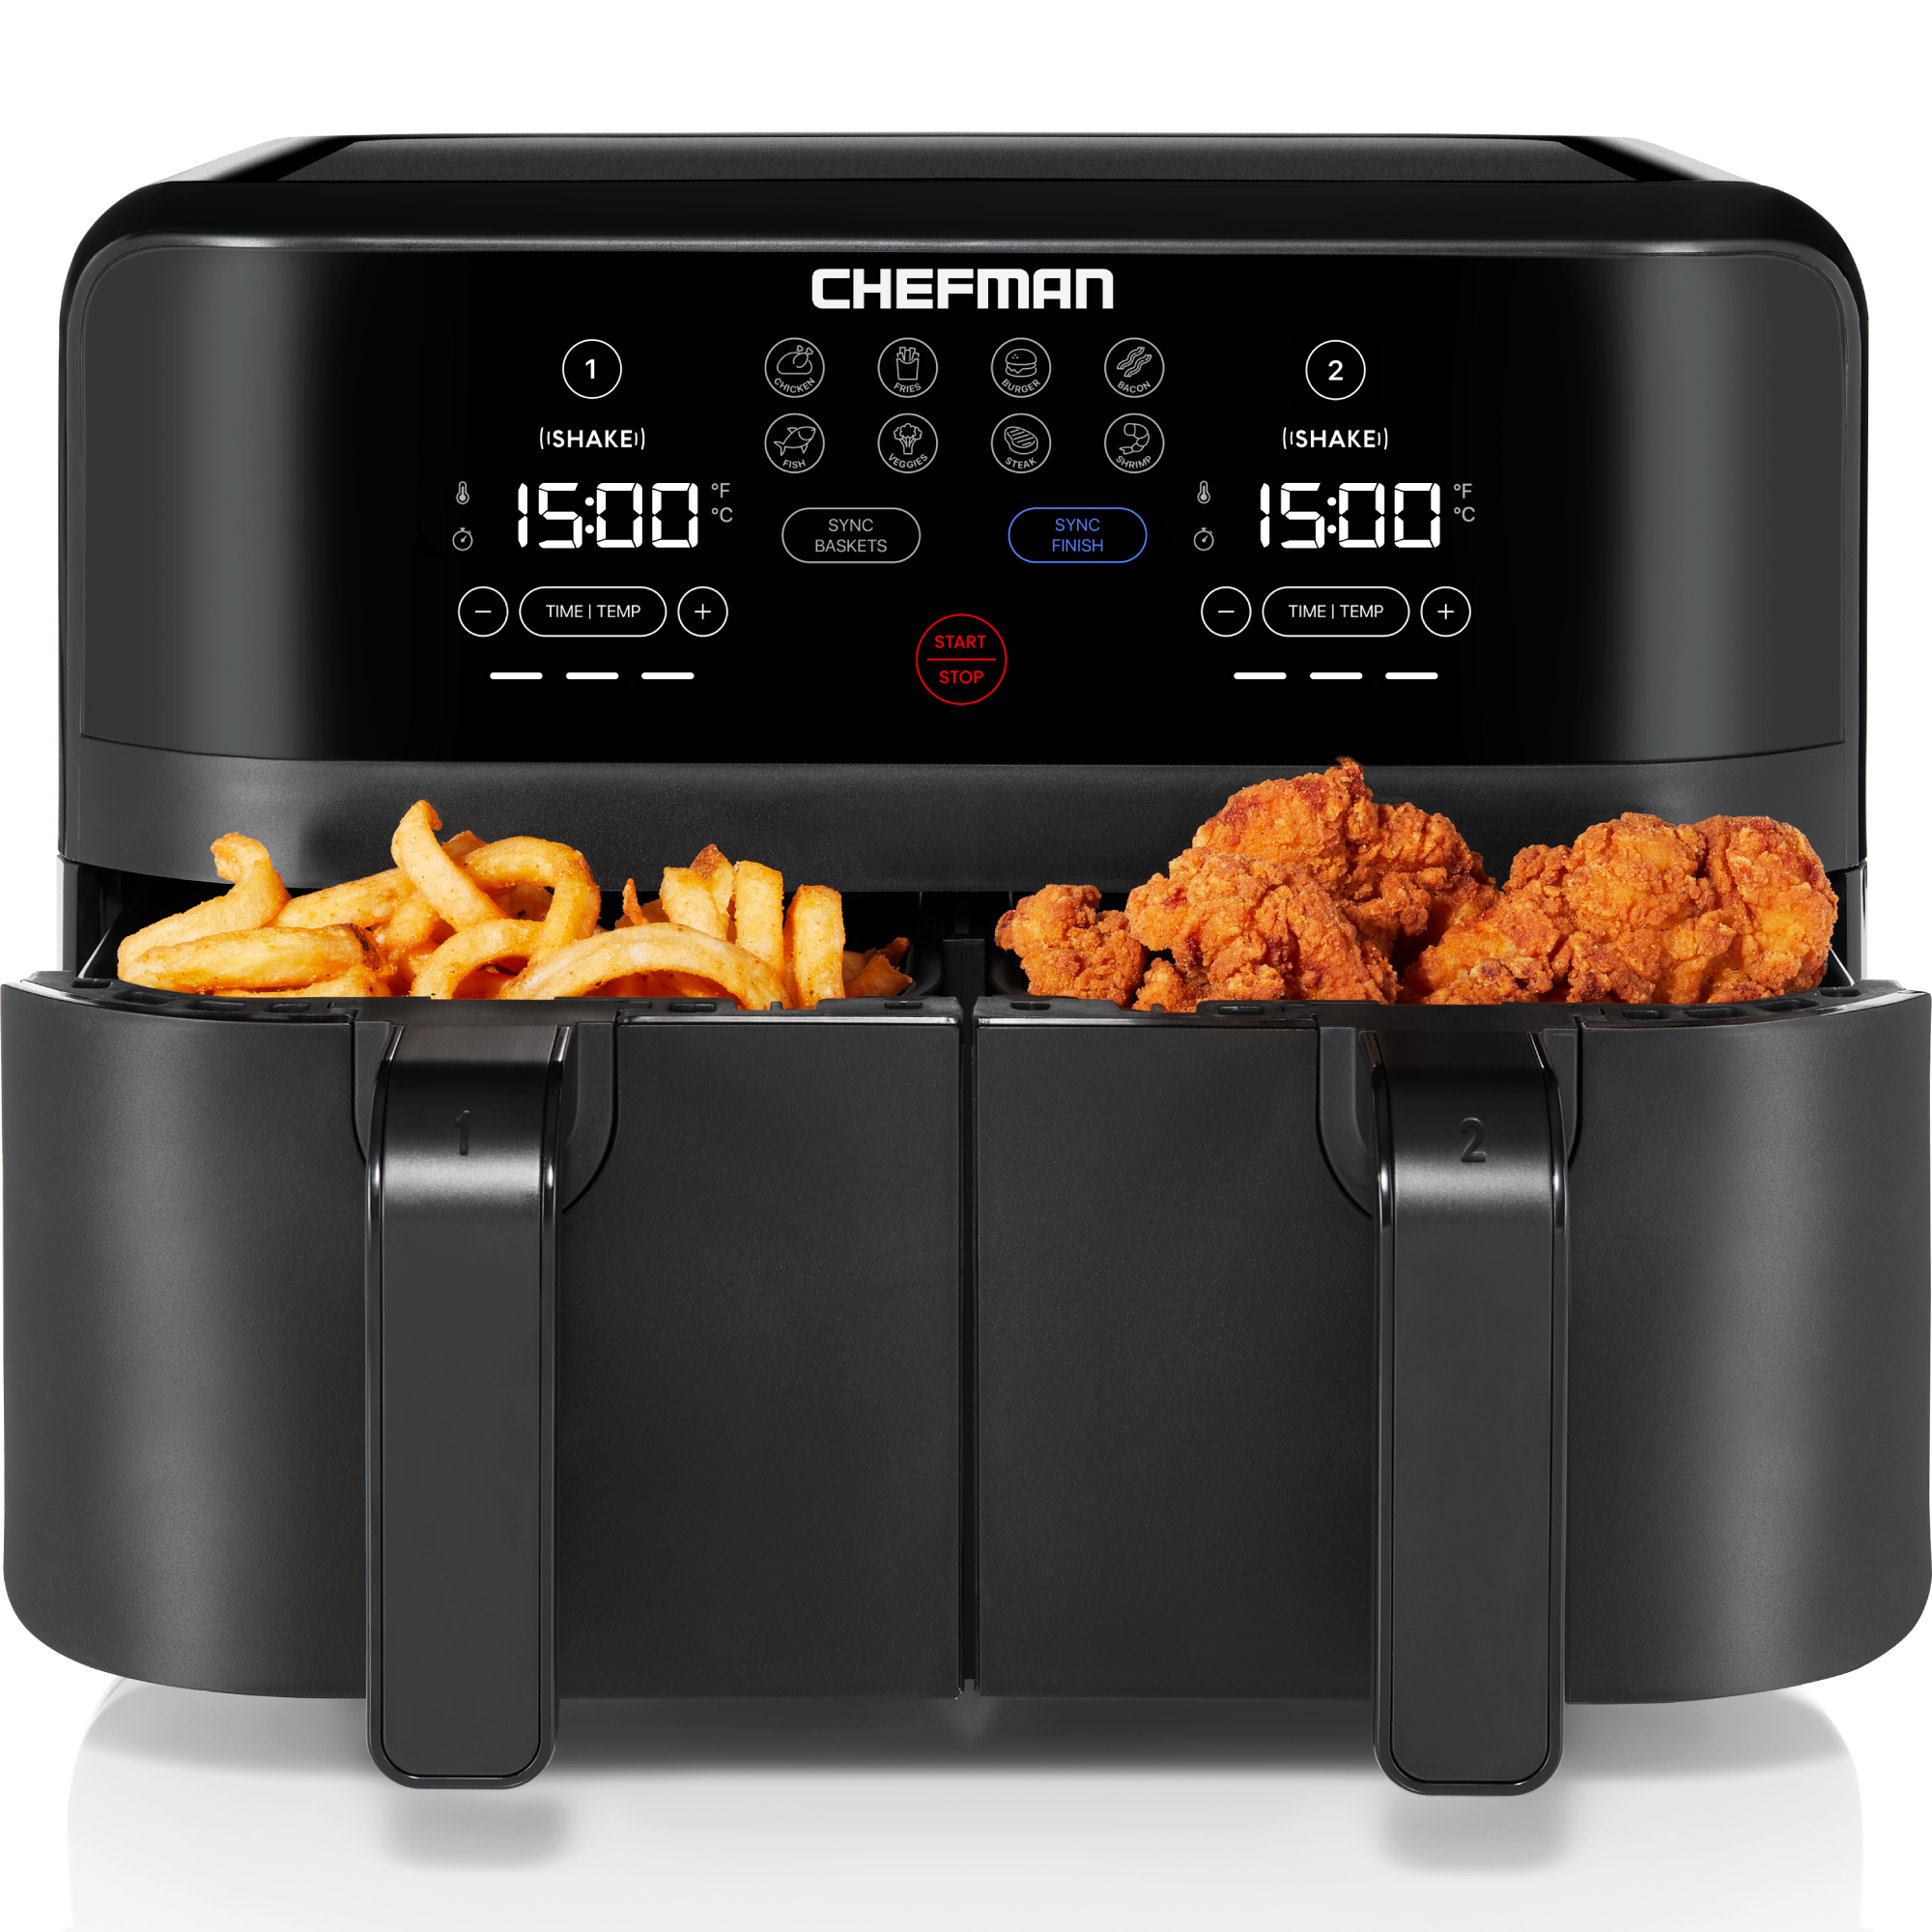 Chefman Turbofry Dual Basket Air Fryer w/ Digital Touch Display, 9 Qt Capacity - Black, New - image 1 of 8